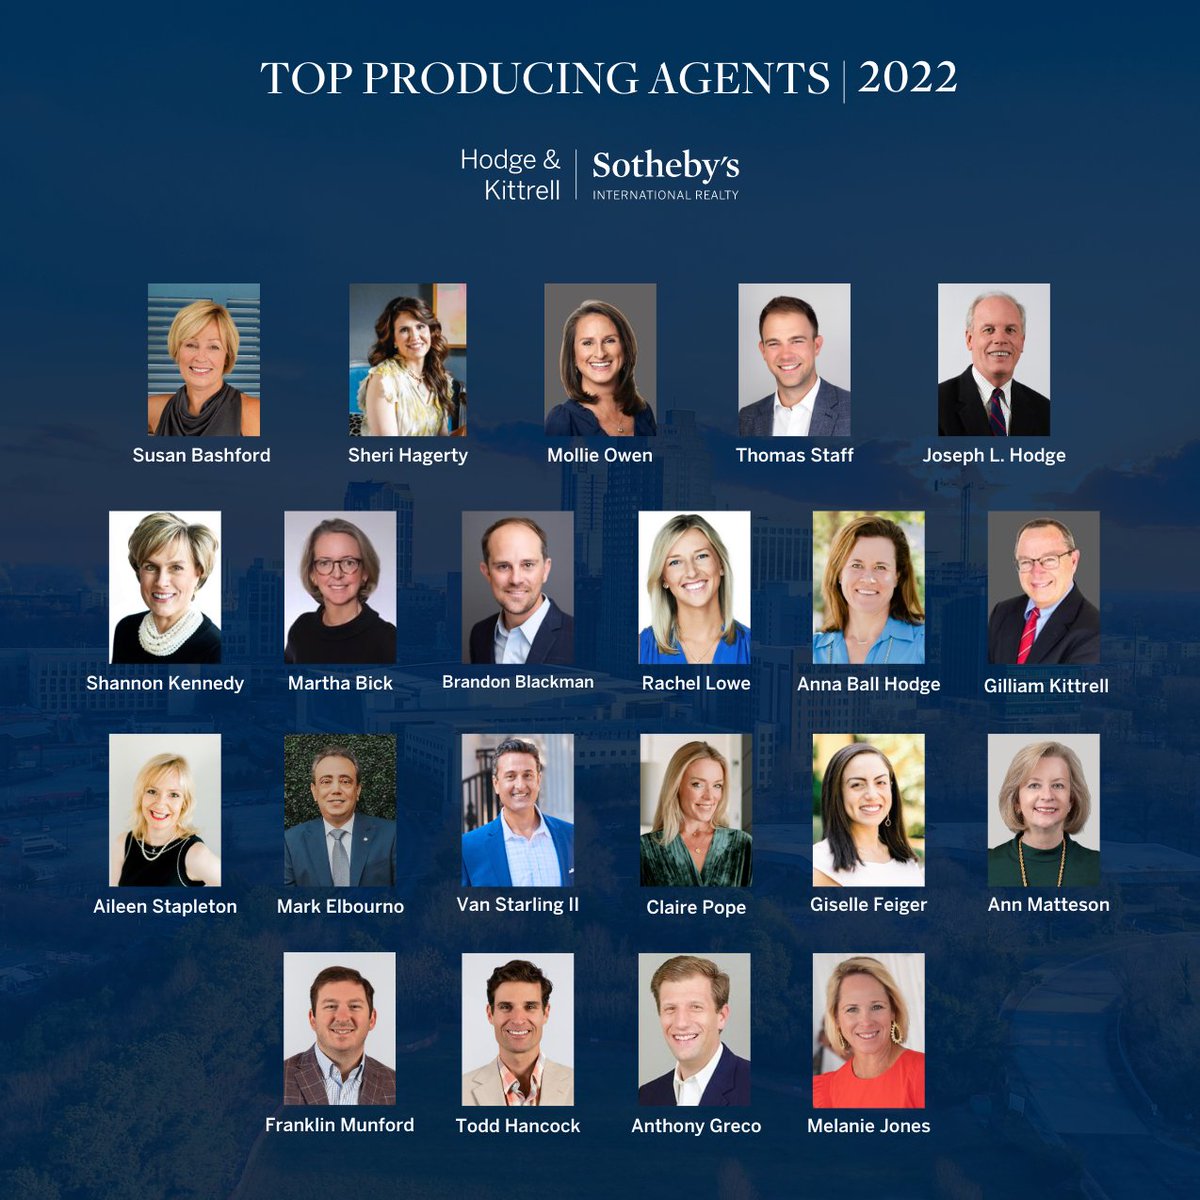 Congratulations to our 2022 Top Producing Agents! 

#SIRcletheglobe #sothebysinternationalrealty #topproducingagent #TheTriangle